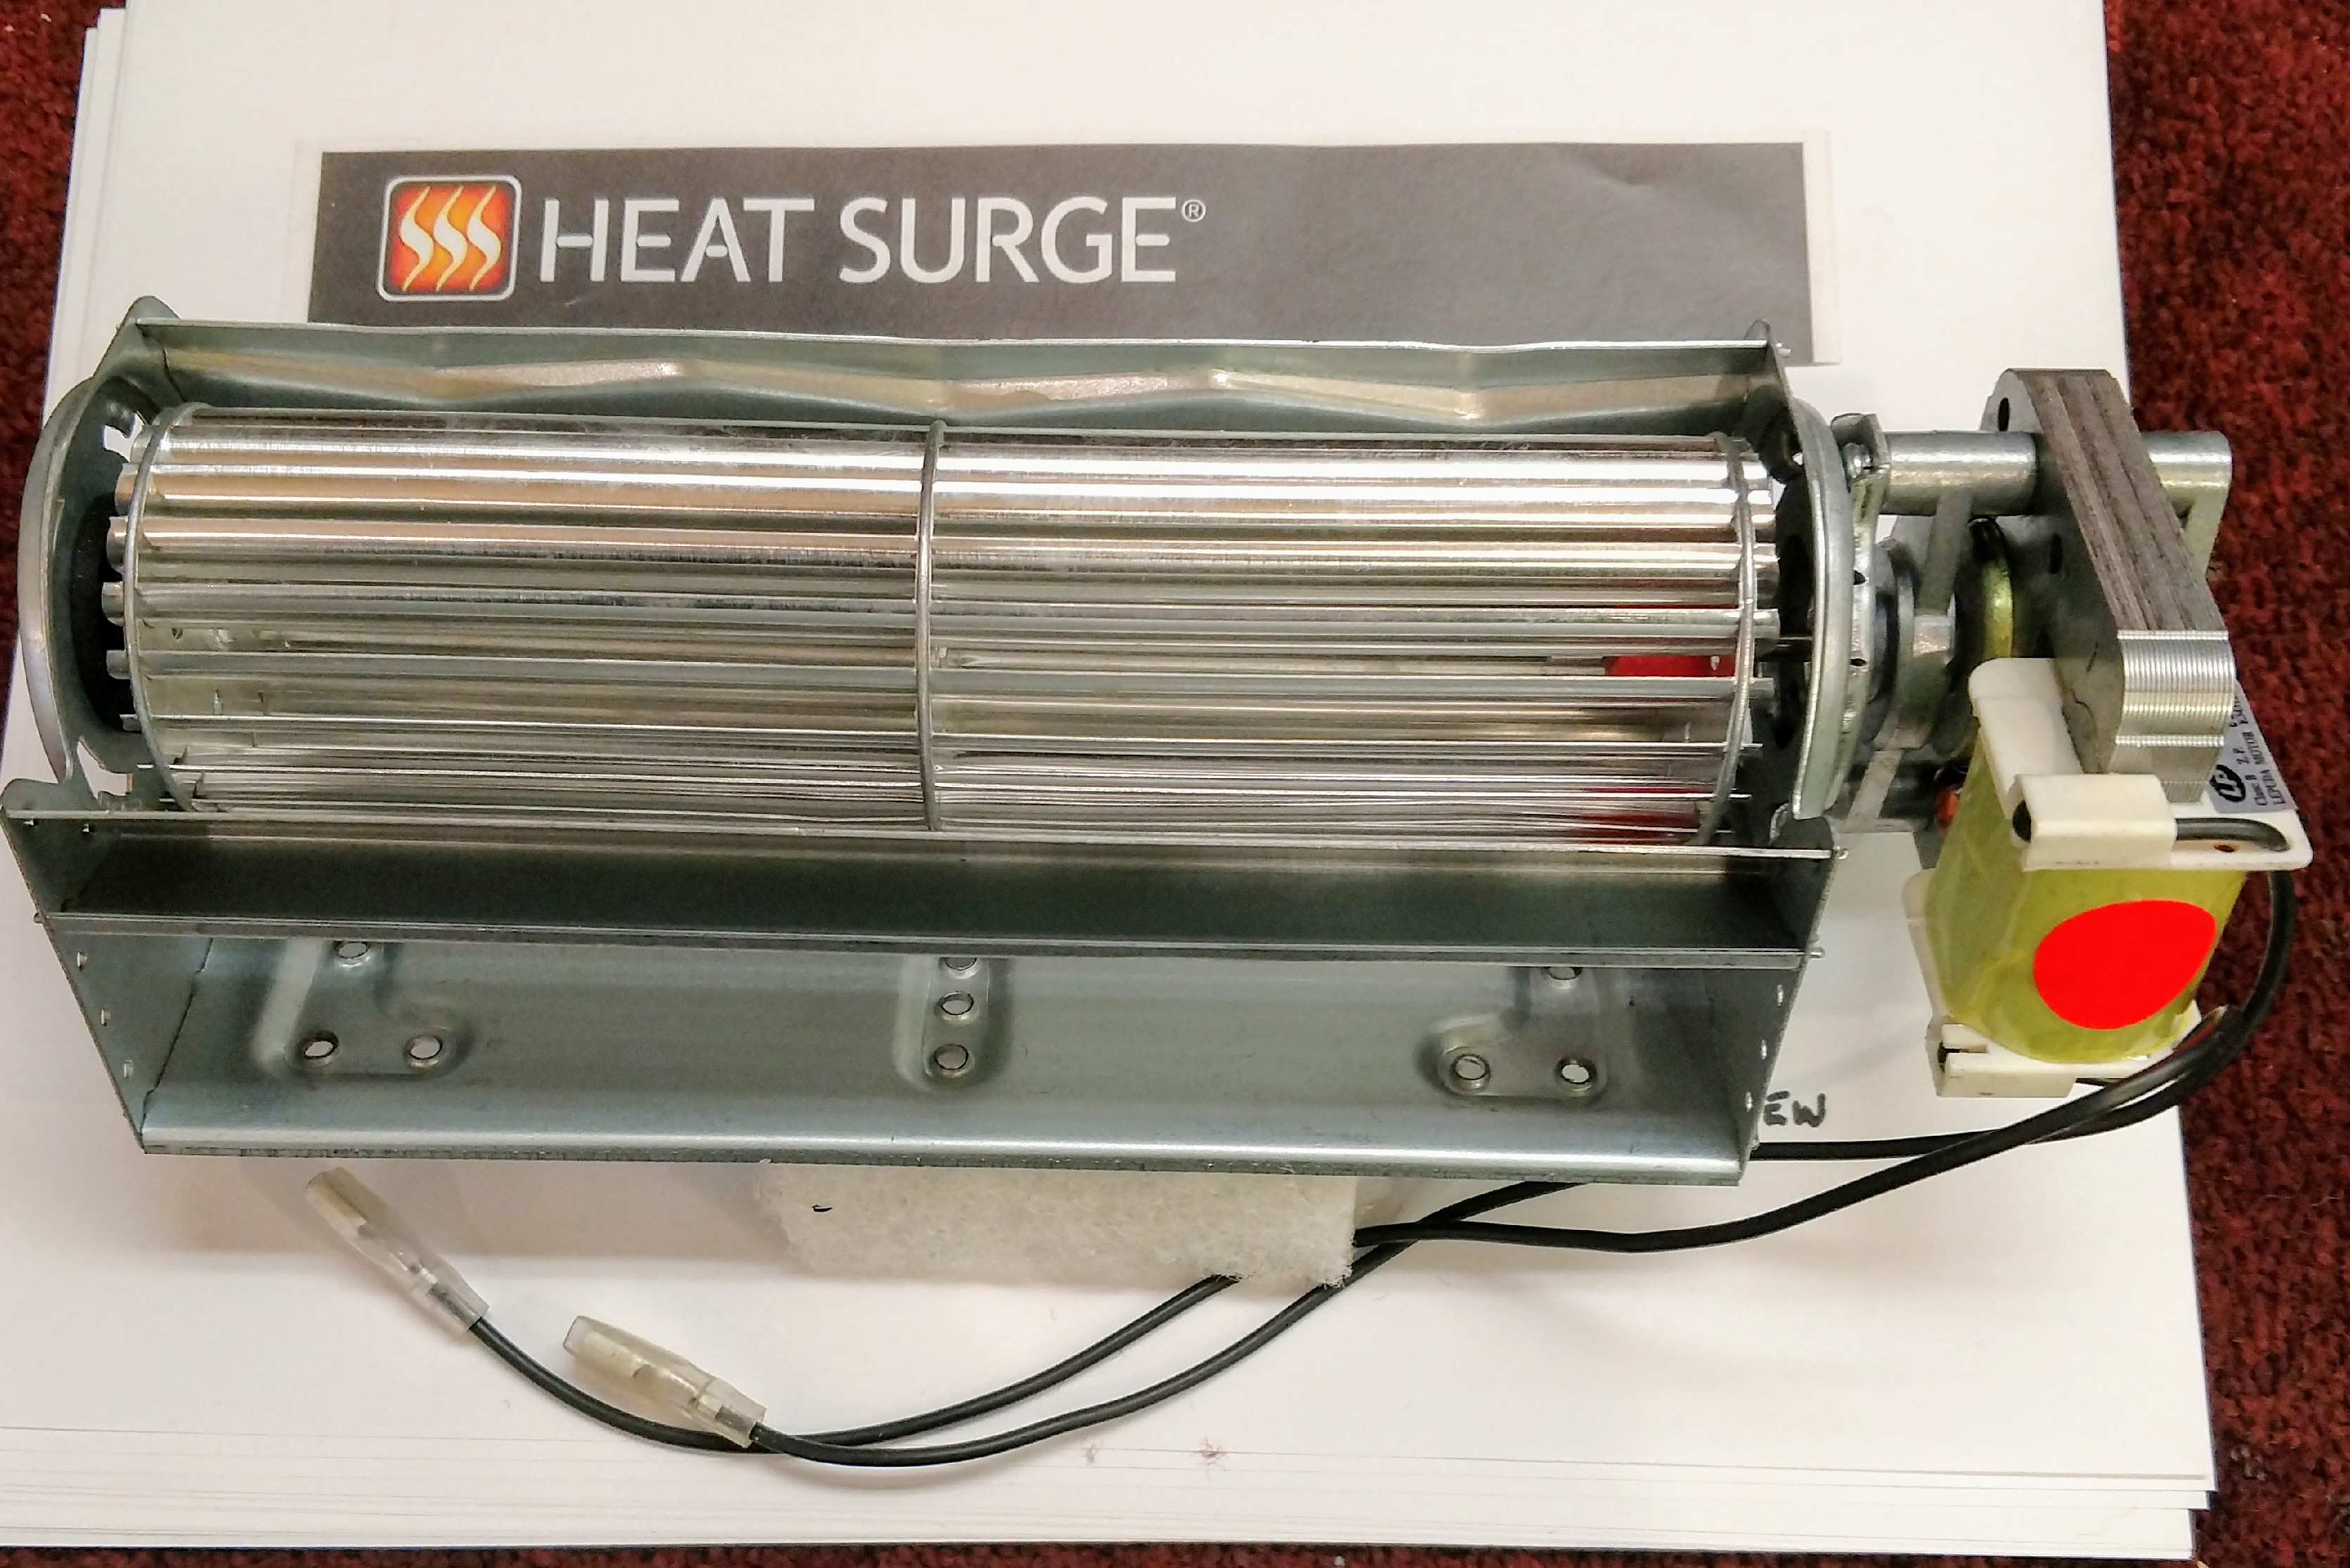 Heat Surge W-5 Group Blower Fan With Motor #HS-ORCCLBFM